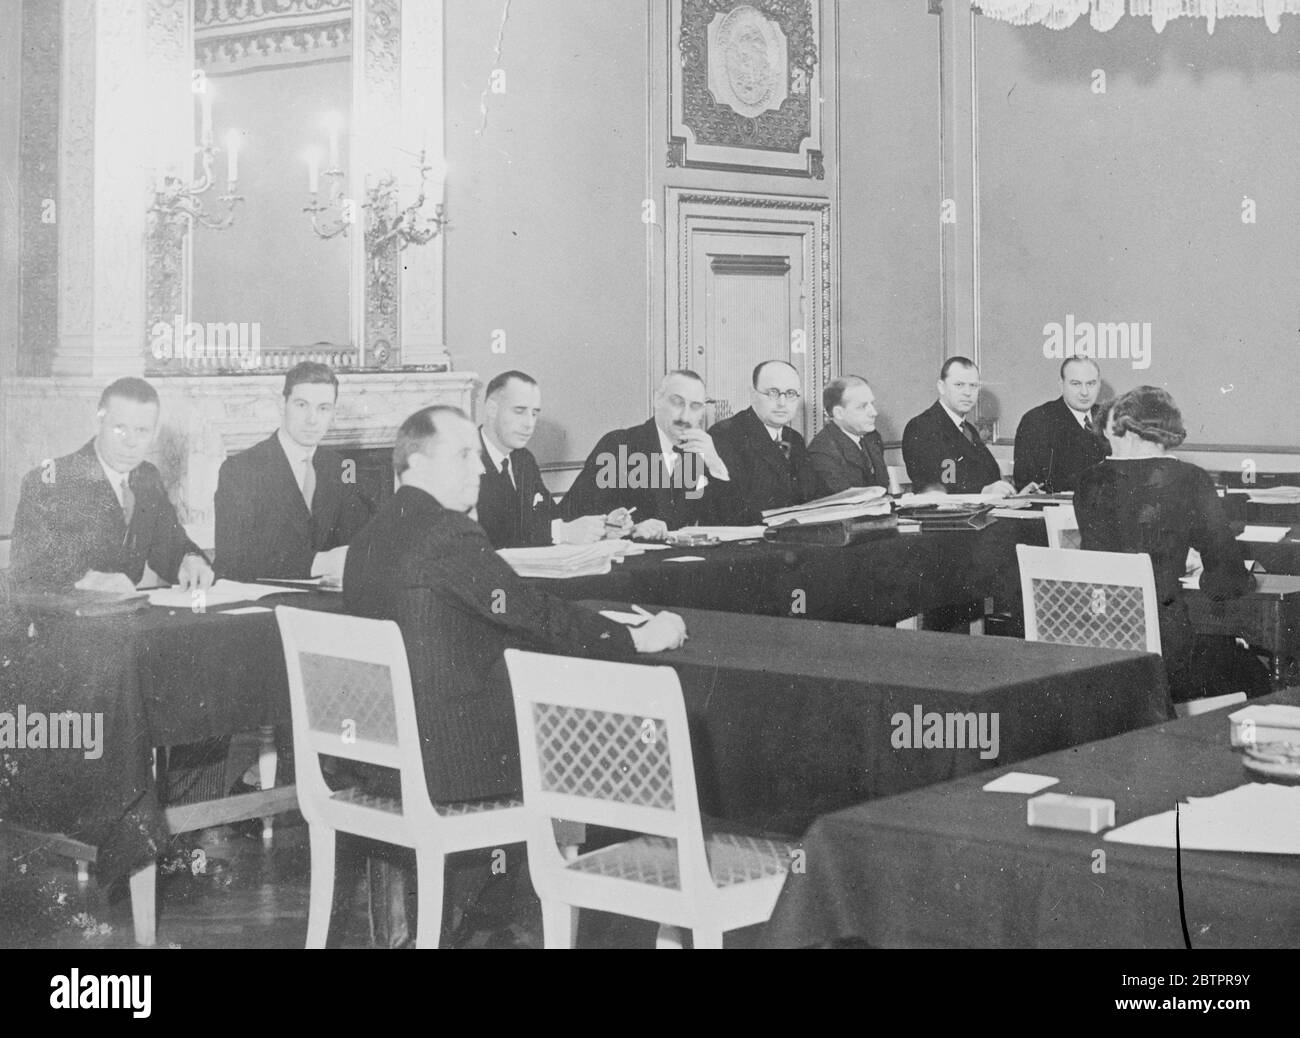 Oslo states meet in Copenhagen. May recognise Italian Abyssinia. It is reported that definite moves by the Oslo States now meeting in conference at Copenhagen, Denmark for the recognition of Italy's conquest of Abyssinia, may be expected soon. The 'Oslo States' are Norway, Sweden, Denmark, Finland, Holland, Belgium and Luxembourg, which cooperates on economic and diplomatic questions. Belgian now supports Holland in favour of such recognition and only Norway is hesitating. Photo shows, the meeting of the Oslo States in Christiansborg Castle, Copenhagen. Left to right, M Baert (Belgium), Baron Stock Photo